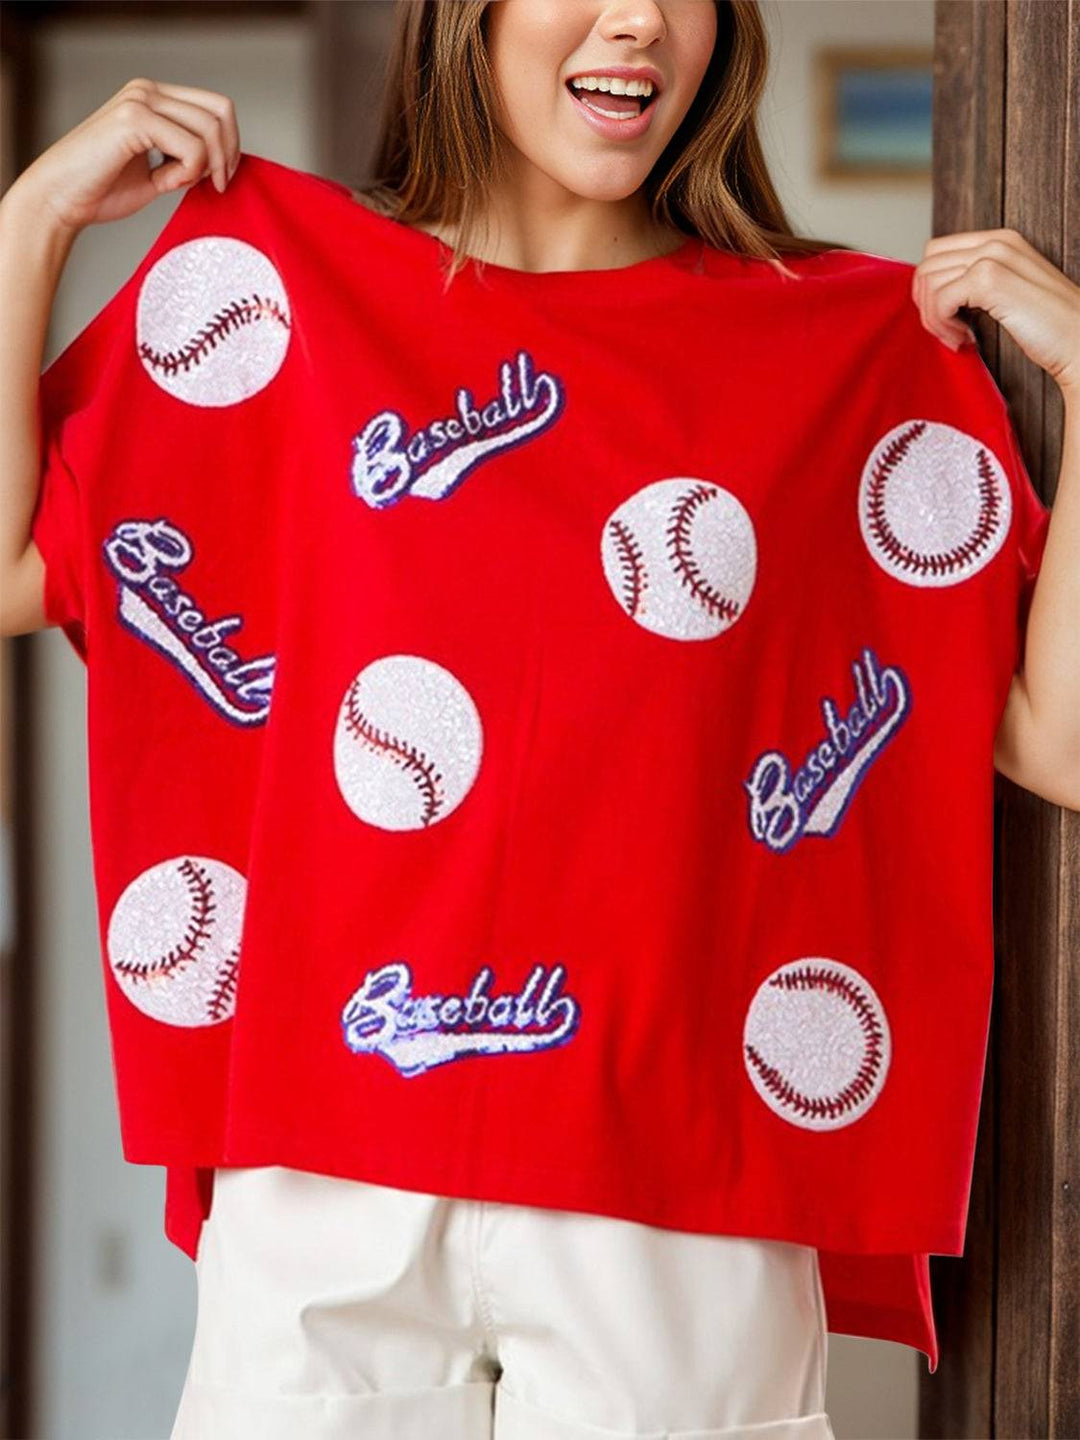 a woman wearing a red shirt with baseballs on it